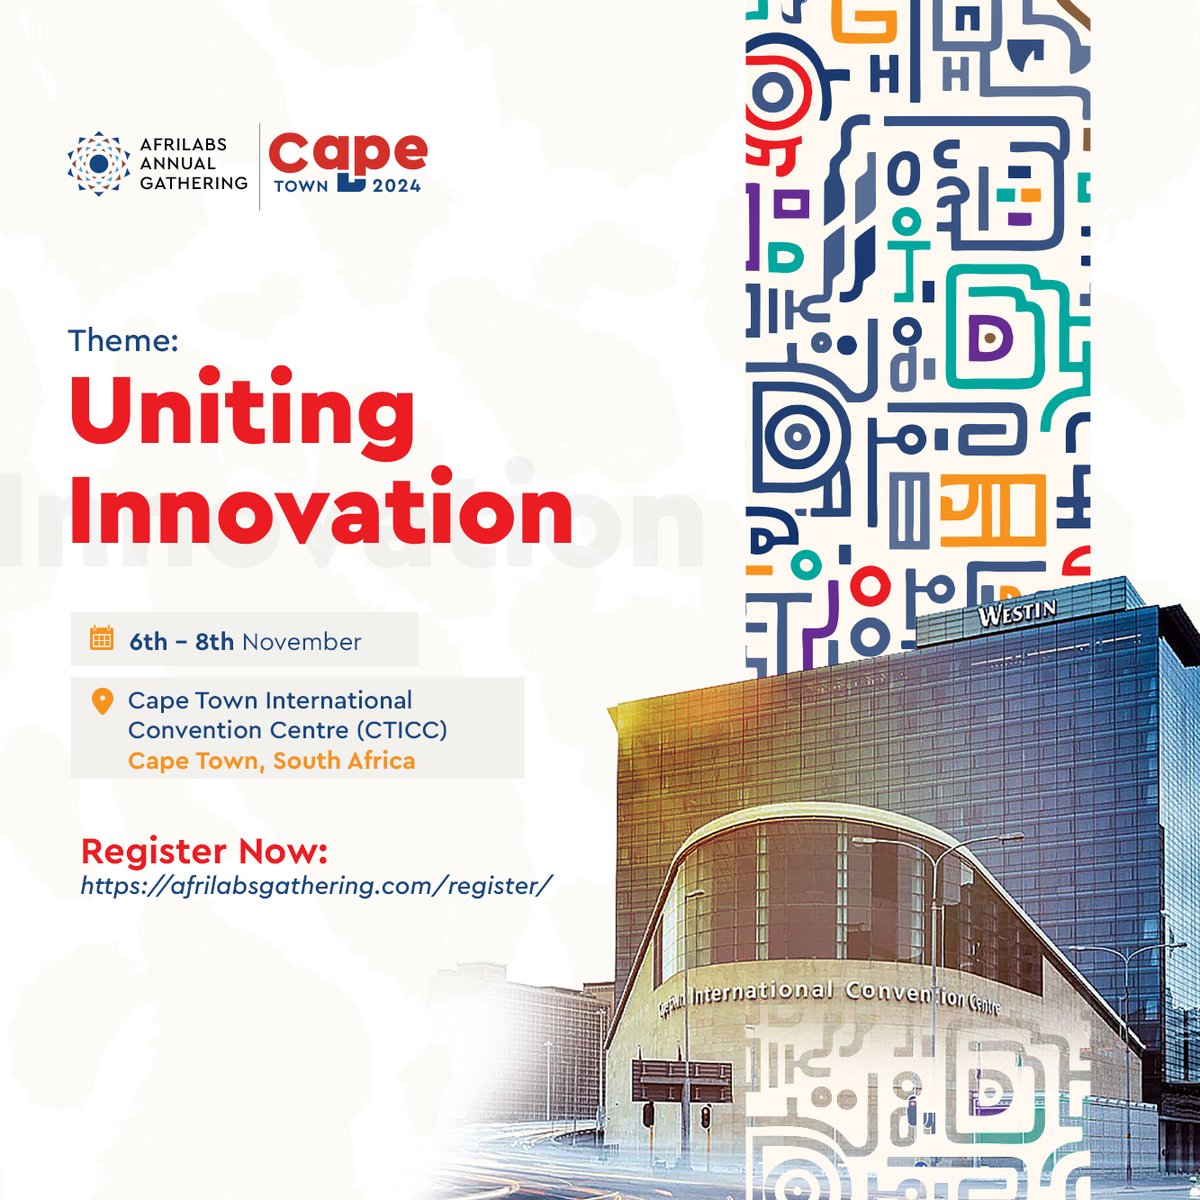 💫 Join us in Cape Town, South Africa, for the AfriLabs Annual Gathering 2024 as we unite under the theme 'Uniting Innovation'! Connect with African innovators, policymakers, investors, startups, and thought leaders from around the globe to ignite transformative change.…